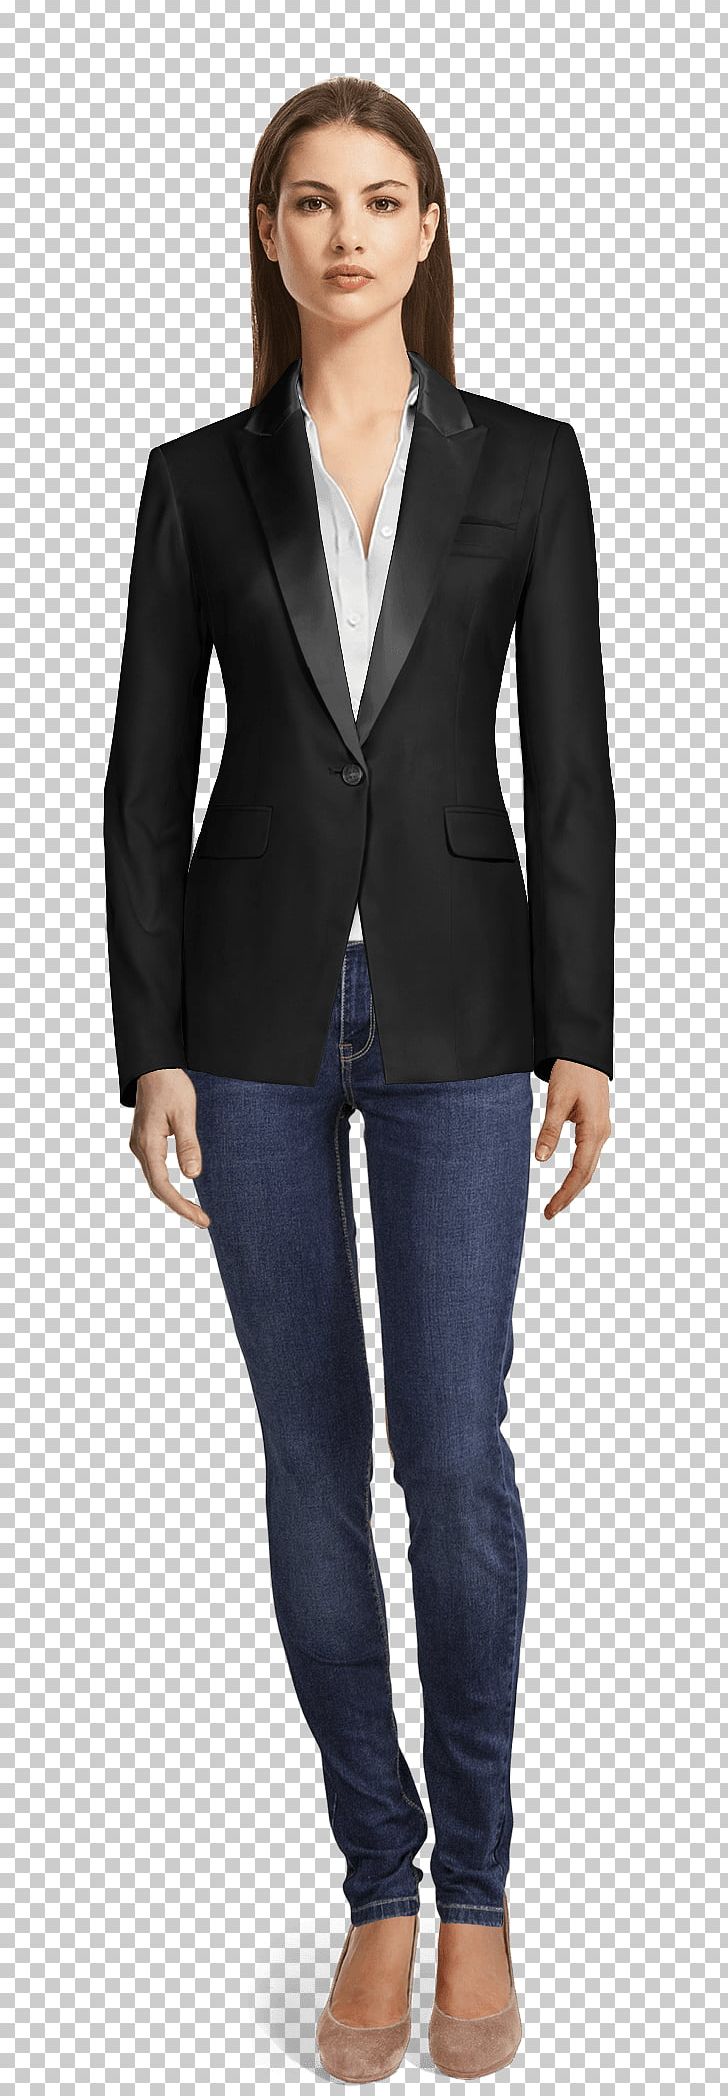 Pant Suits Clothing Blazer Double-breasted PNG, Clipart, Blazer, Blue, Business, Businessperson, Clothing Free PNG Download